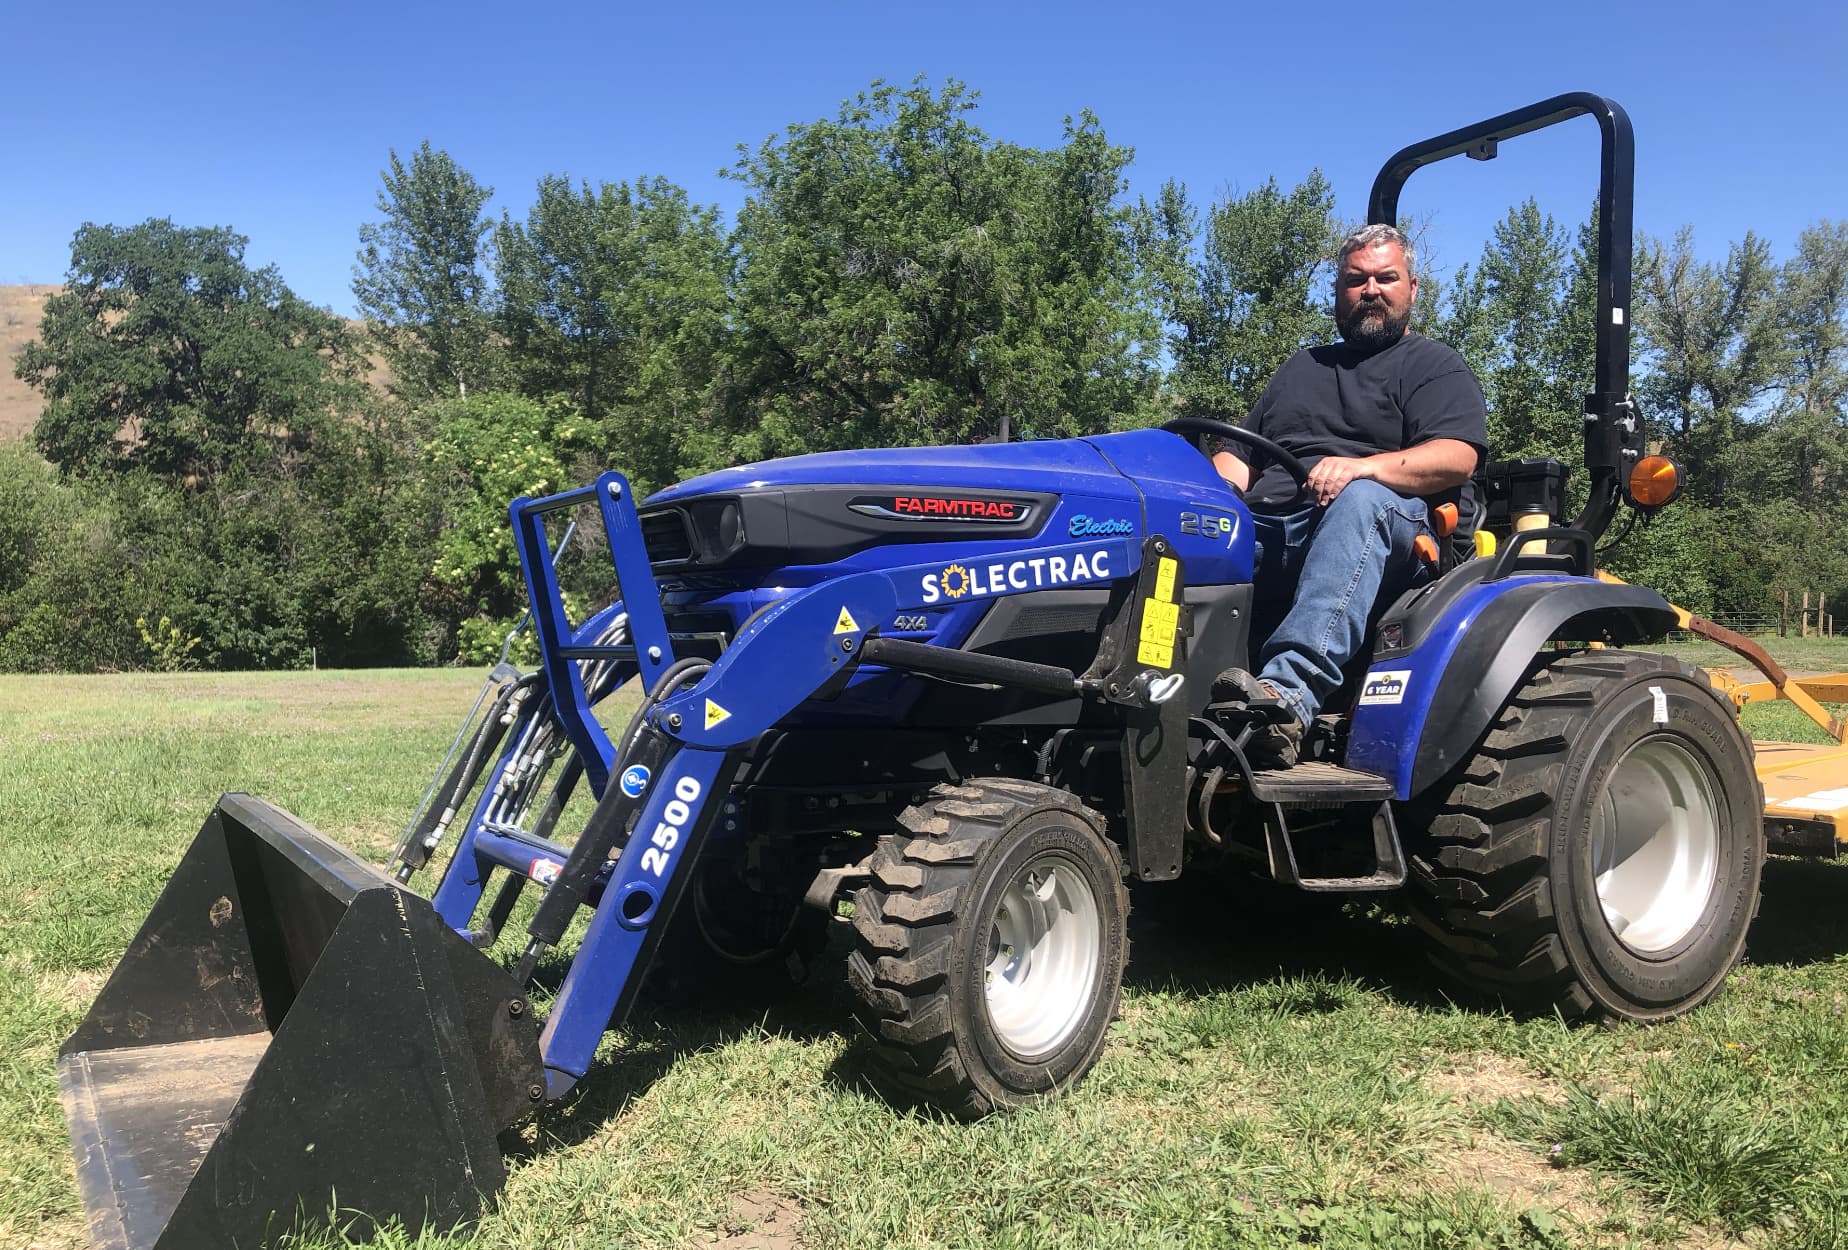 Grant Stringer - A New Project in Rural Oregon Is Letting Farmers Test Drive Electric Tractors in the Name of Science